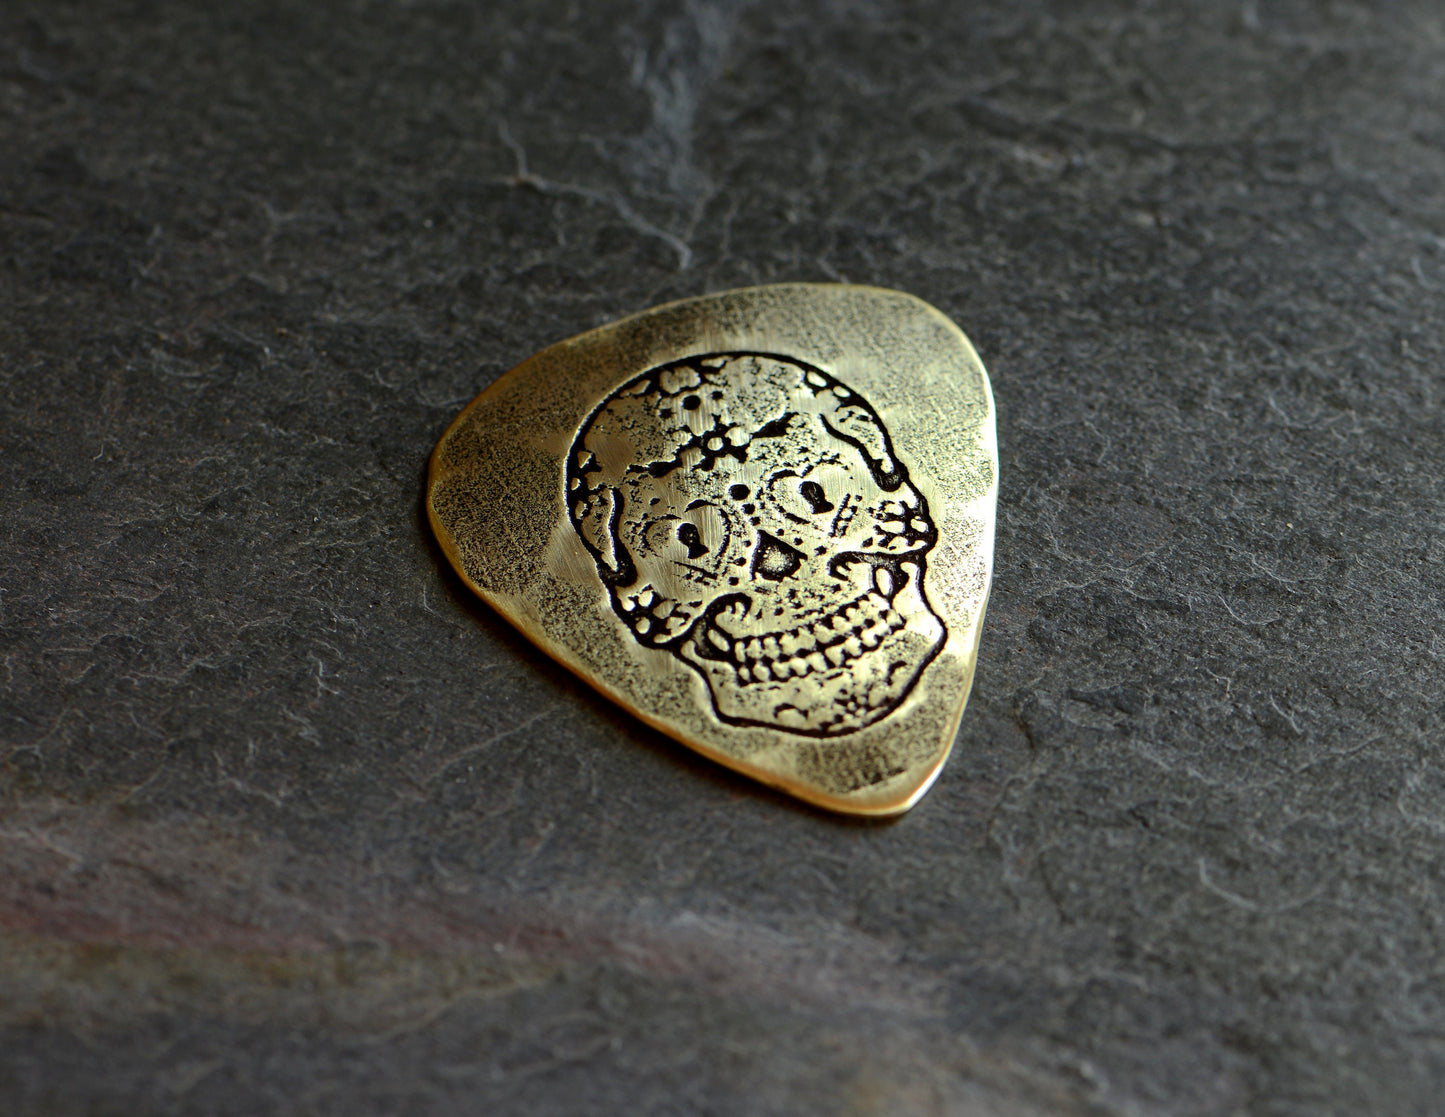 Playable brass guitar pick with sugar skull